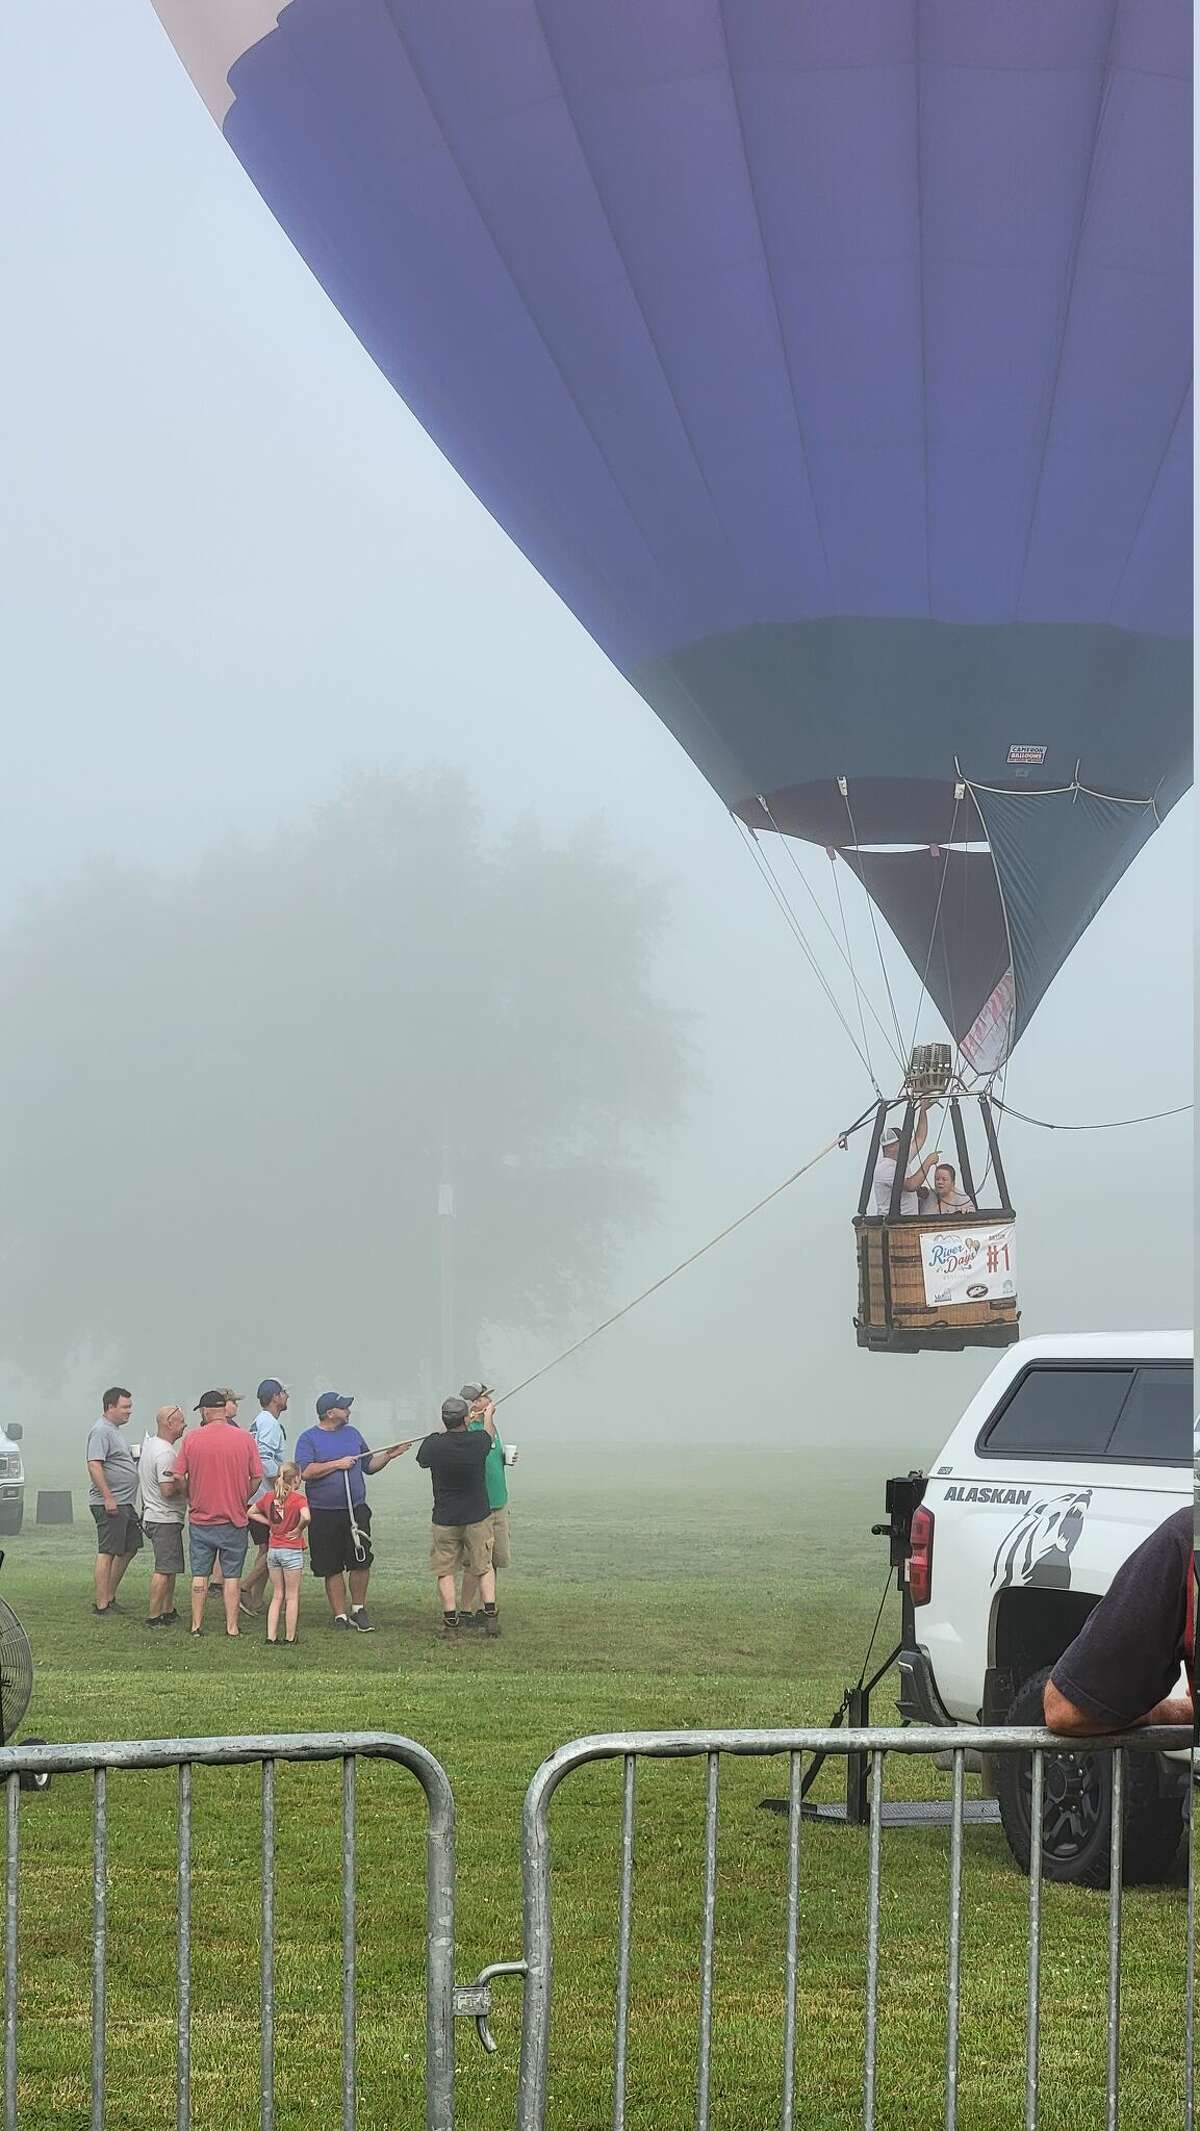 Tethered down by hot air balloon pilots, Tamala Marks and Dennis Hall hover above a misty Chippewassee park on Saturday, Aug. 6. "You could really feel the fog up in the air," Marks said. "It was really magical."